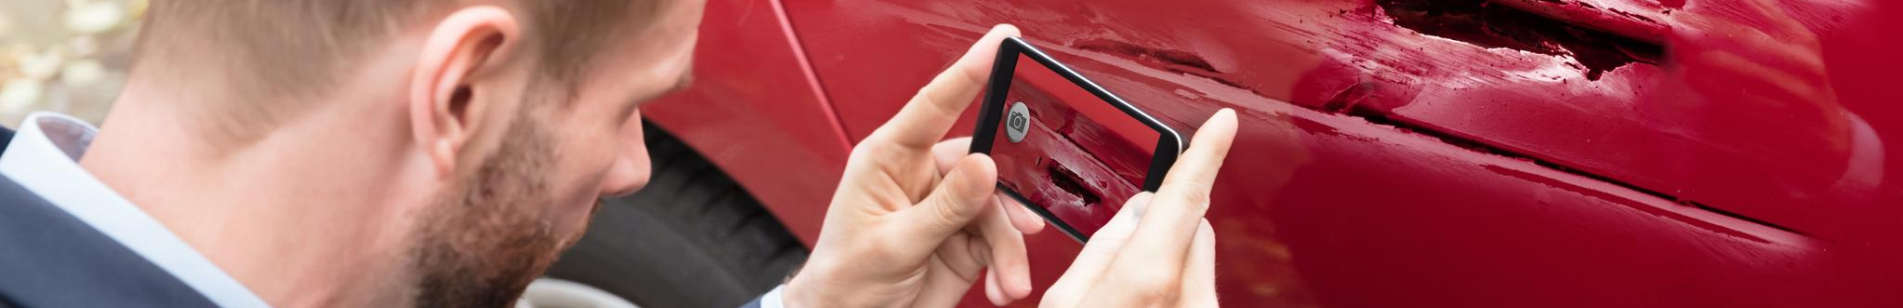 Car owner takes photo of damaged car with smartphone.